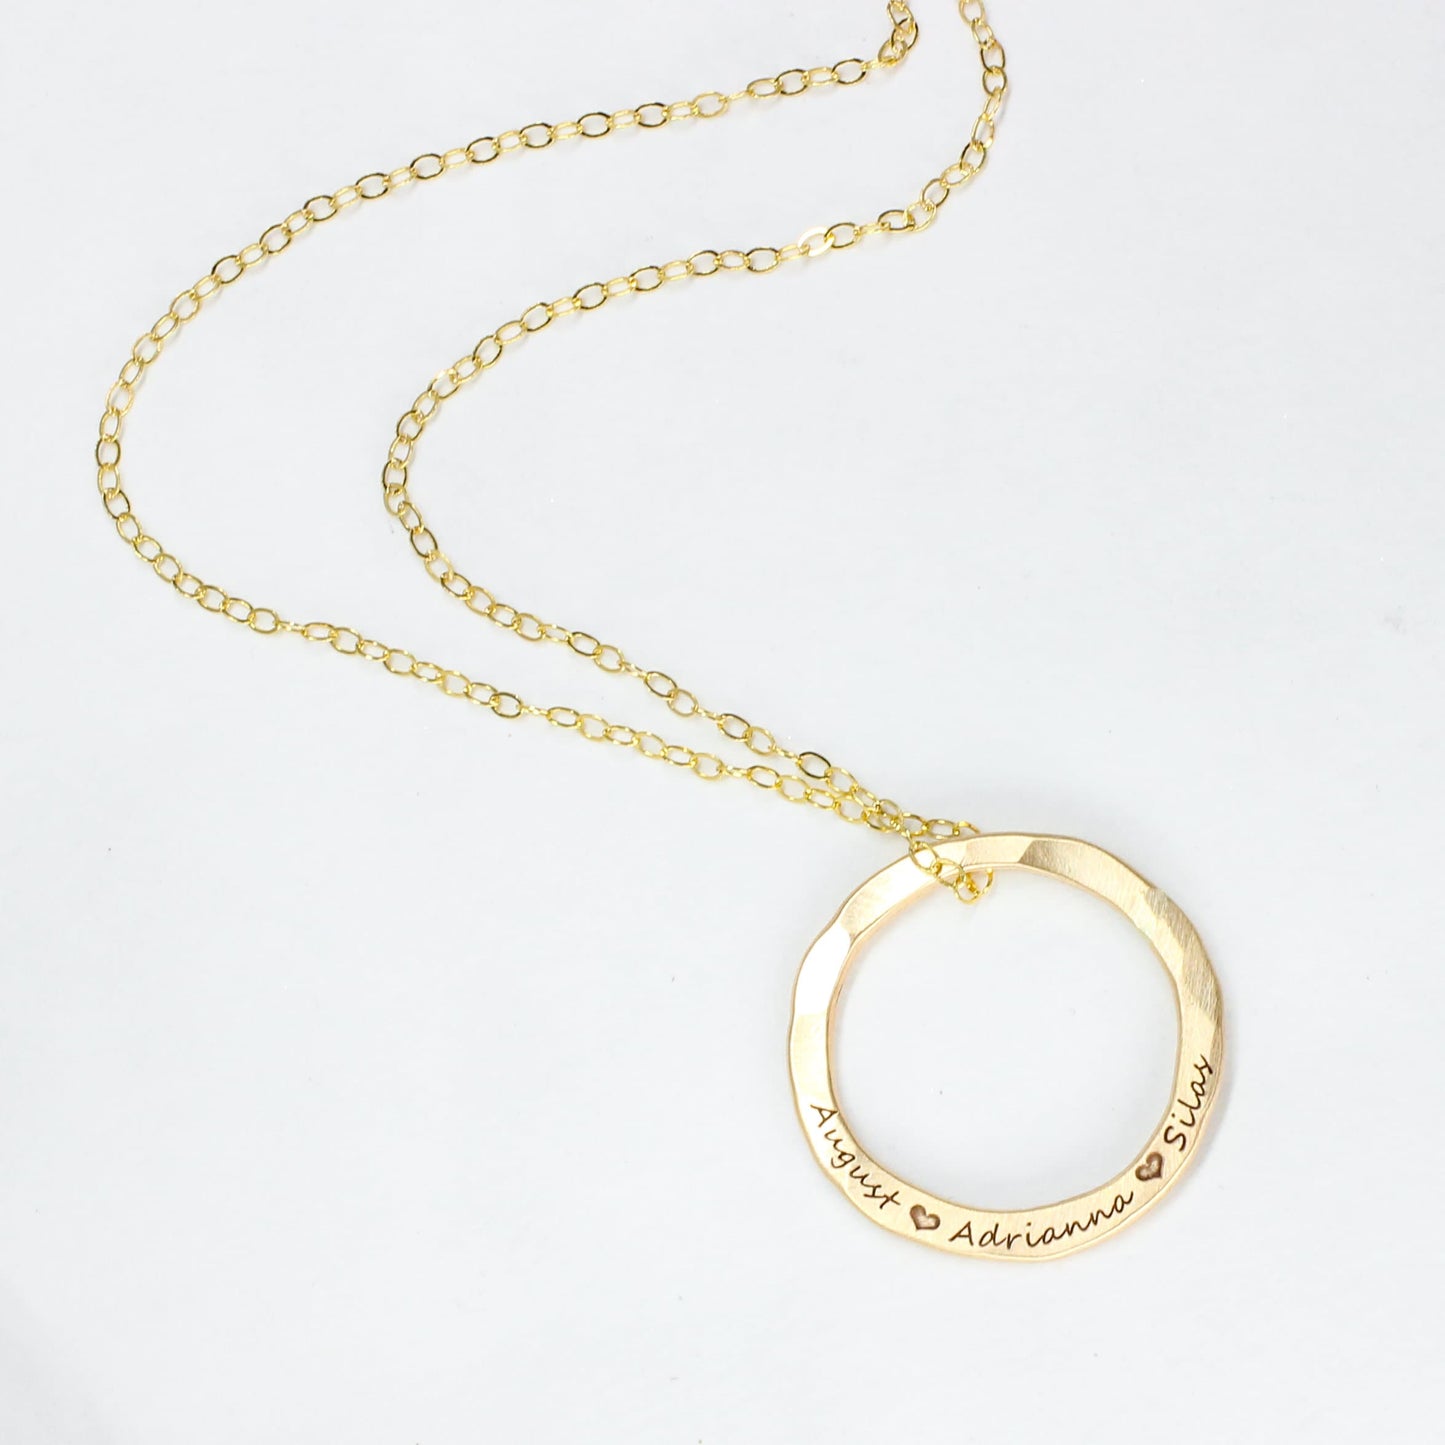 14k Gold Filled Hammered Circle Name Necklace | Custom Engraved Pendant | Handmade Personalized Jewelry